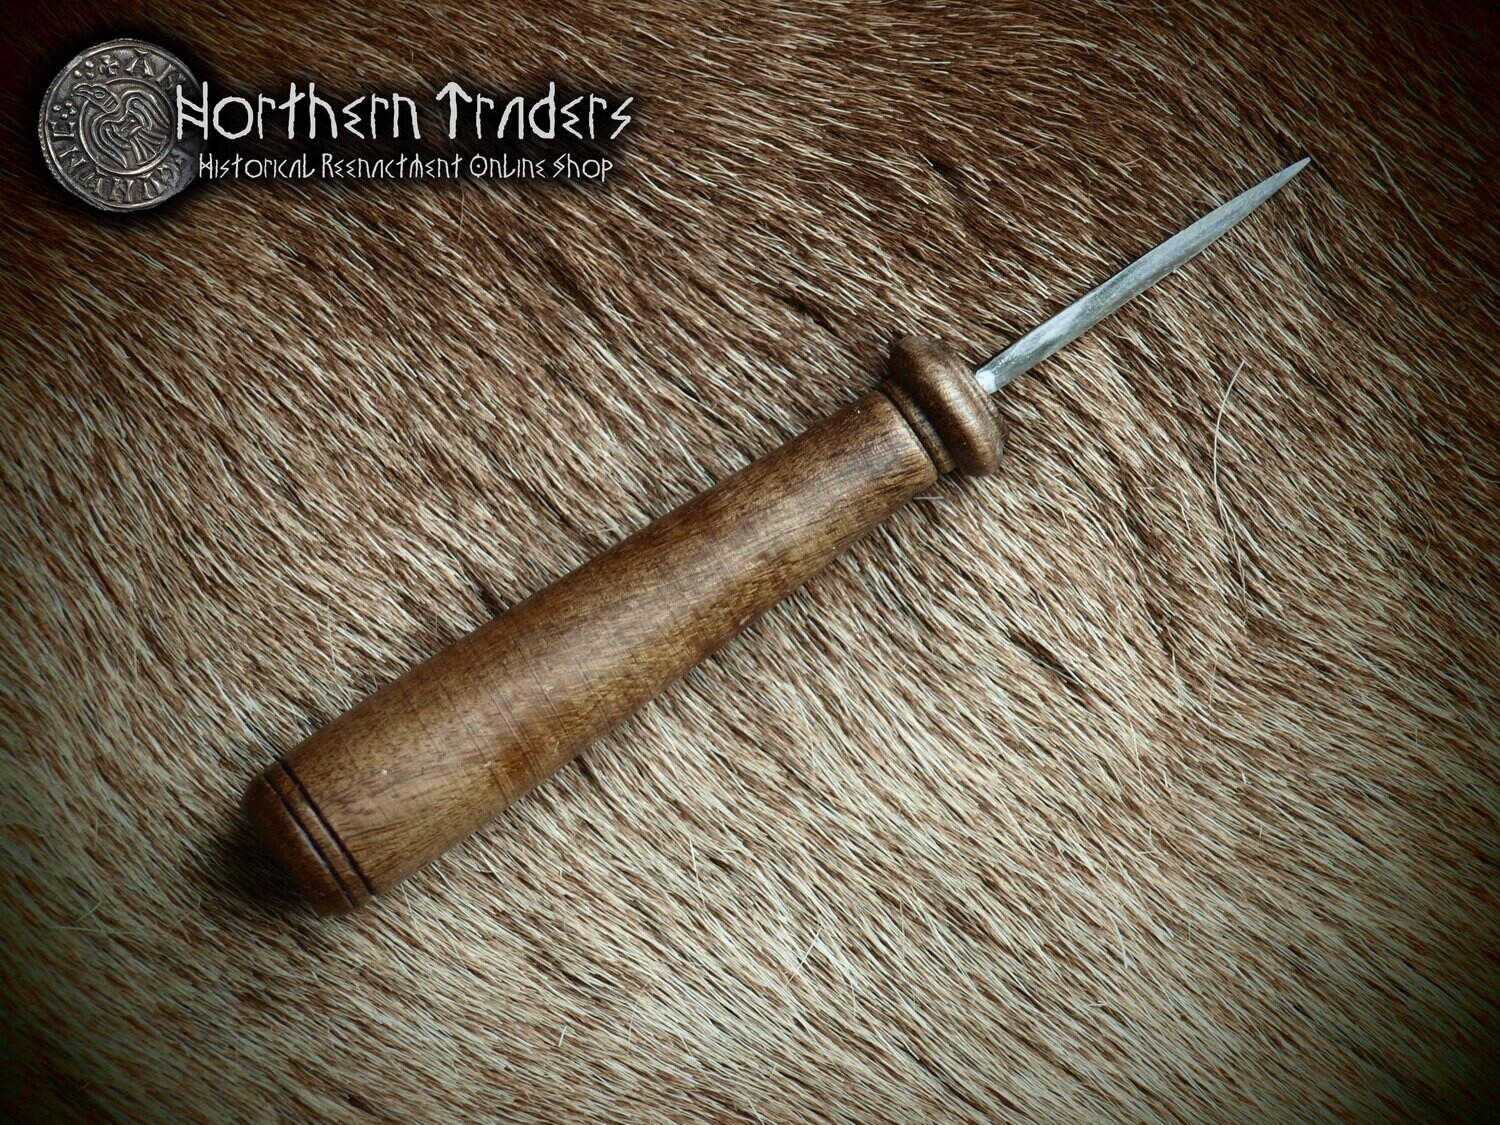 Historical Awl for Leatherworking